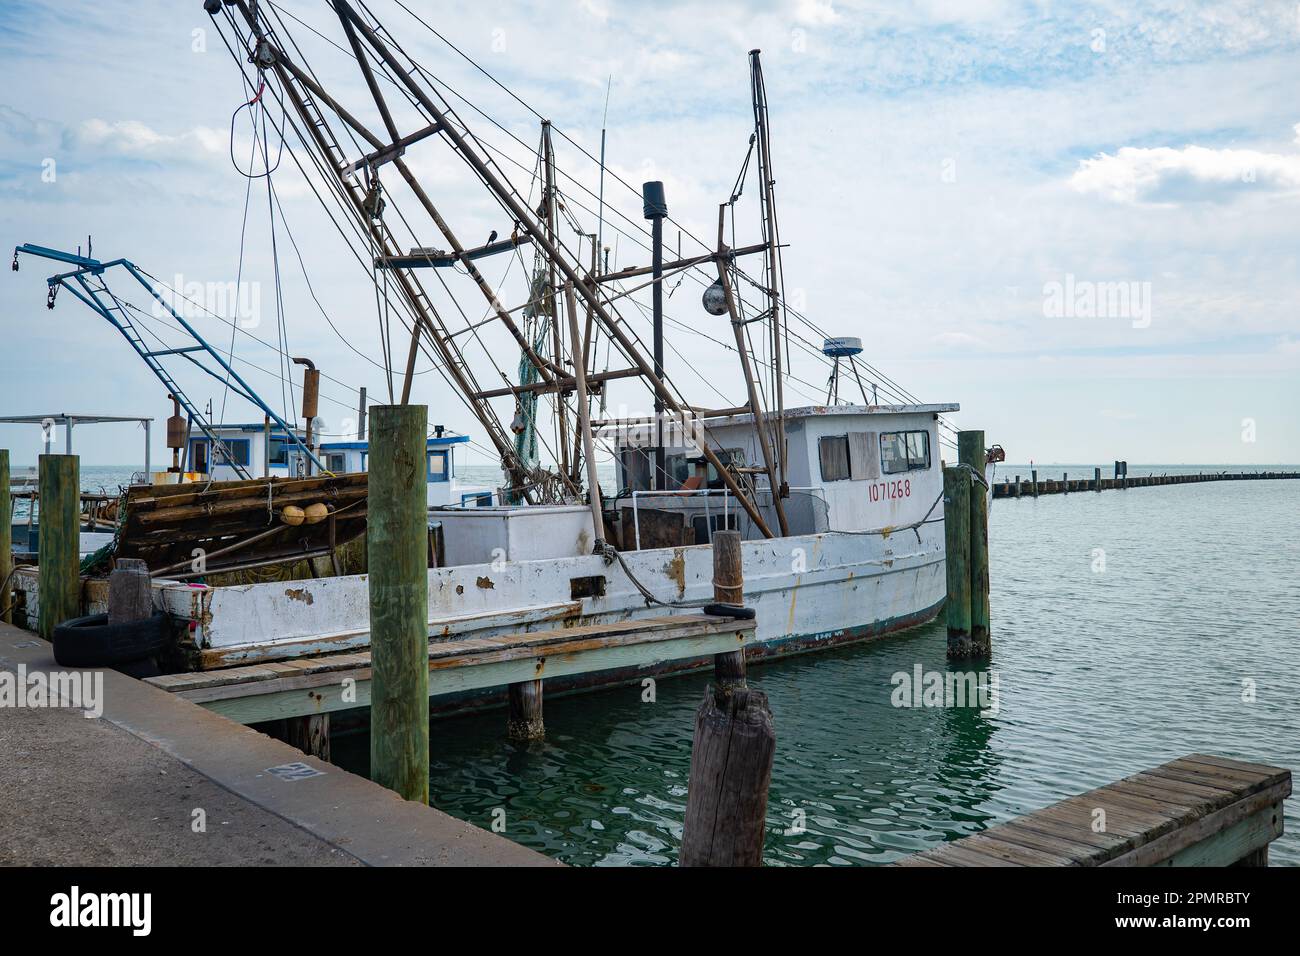 ROCKPORT, TX - 14 FEB 2023: Several commercial fishing boats, moored on the water at a dock in the marina at Rockport, Texas, on a mostly cloudy day. Stock Photo